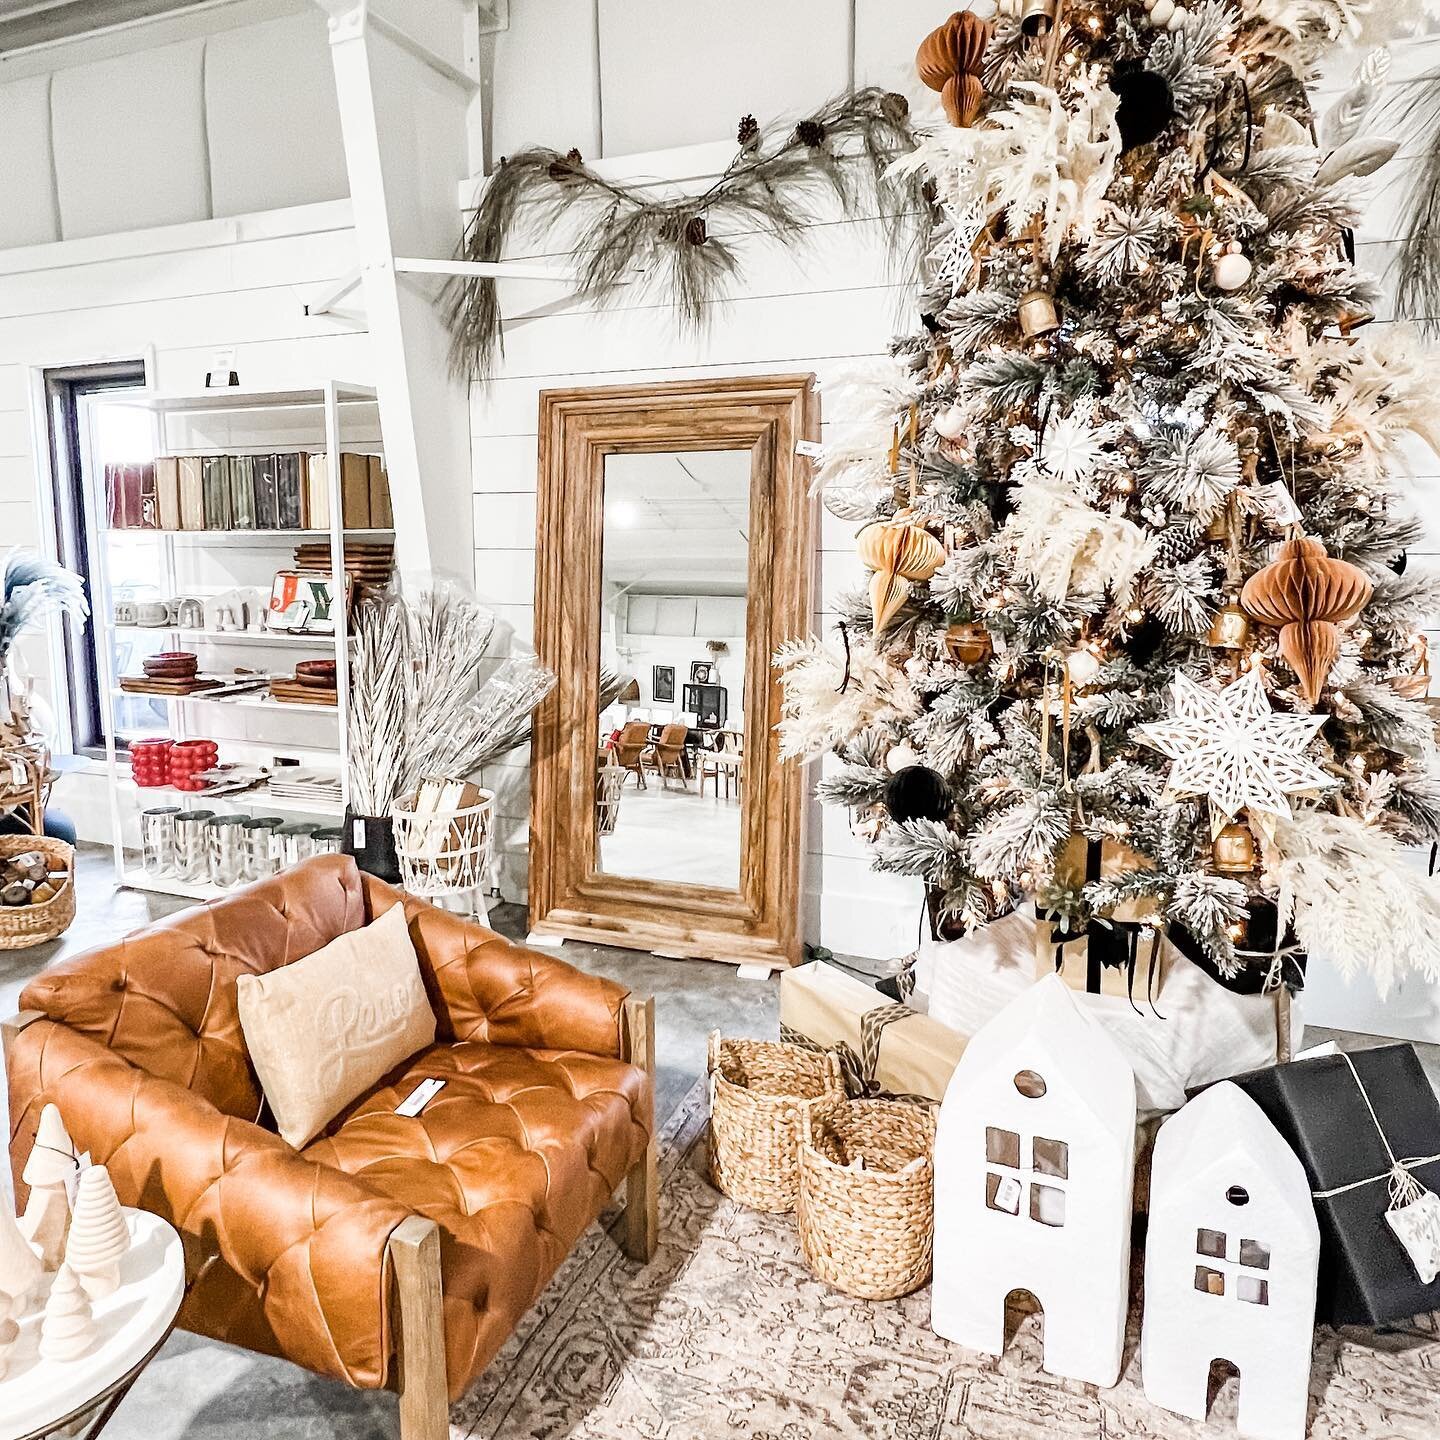 T O M O R R O W !

Come see us from 8am-2pm. We have in stock furniture, 30% off Christmas decor, that amazing new mirror 😍, Furnish Co merch for the first couple in line and so much more! 

30030 US-72
Madison, AL 35756